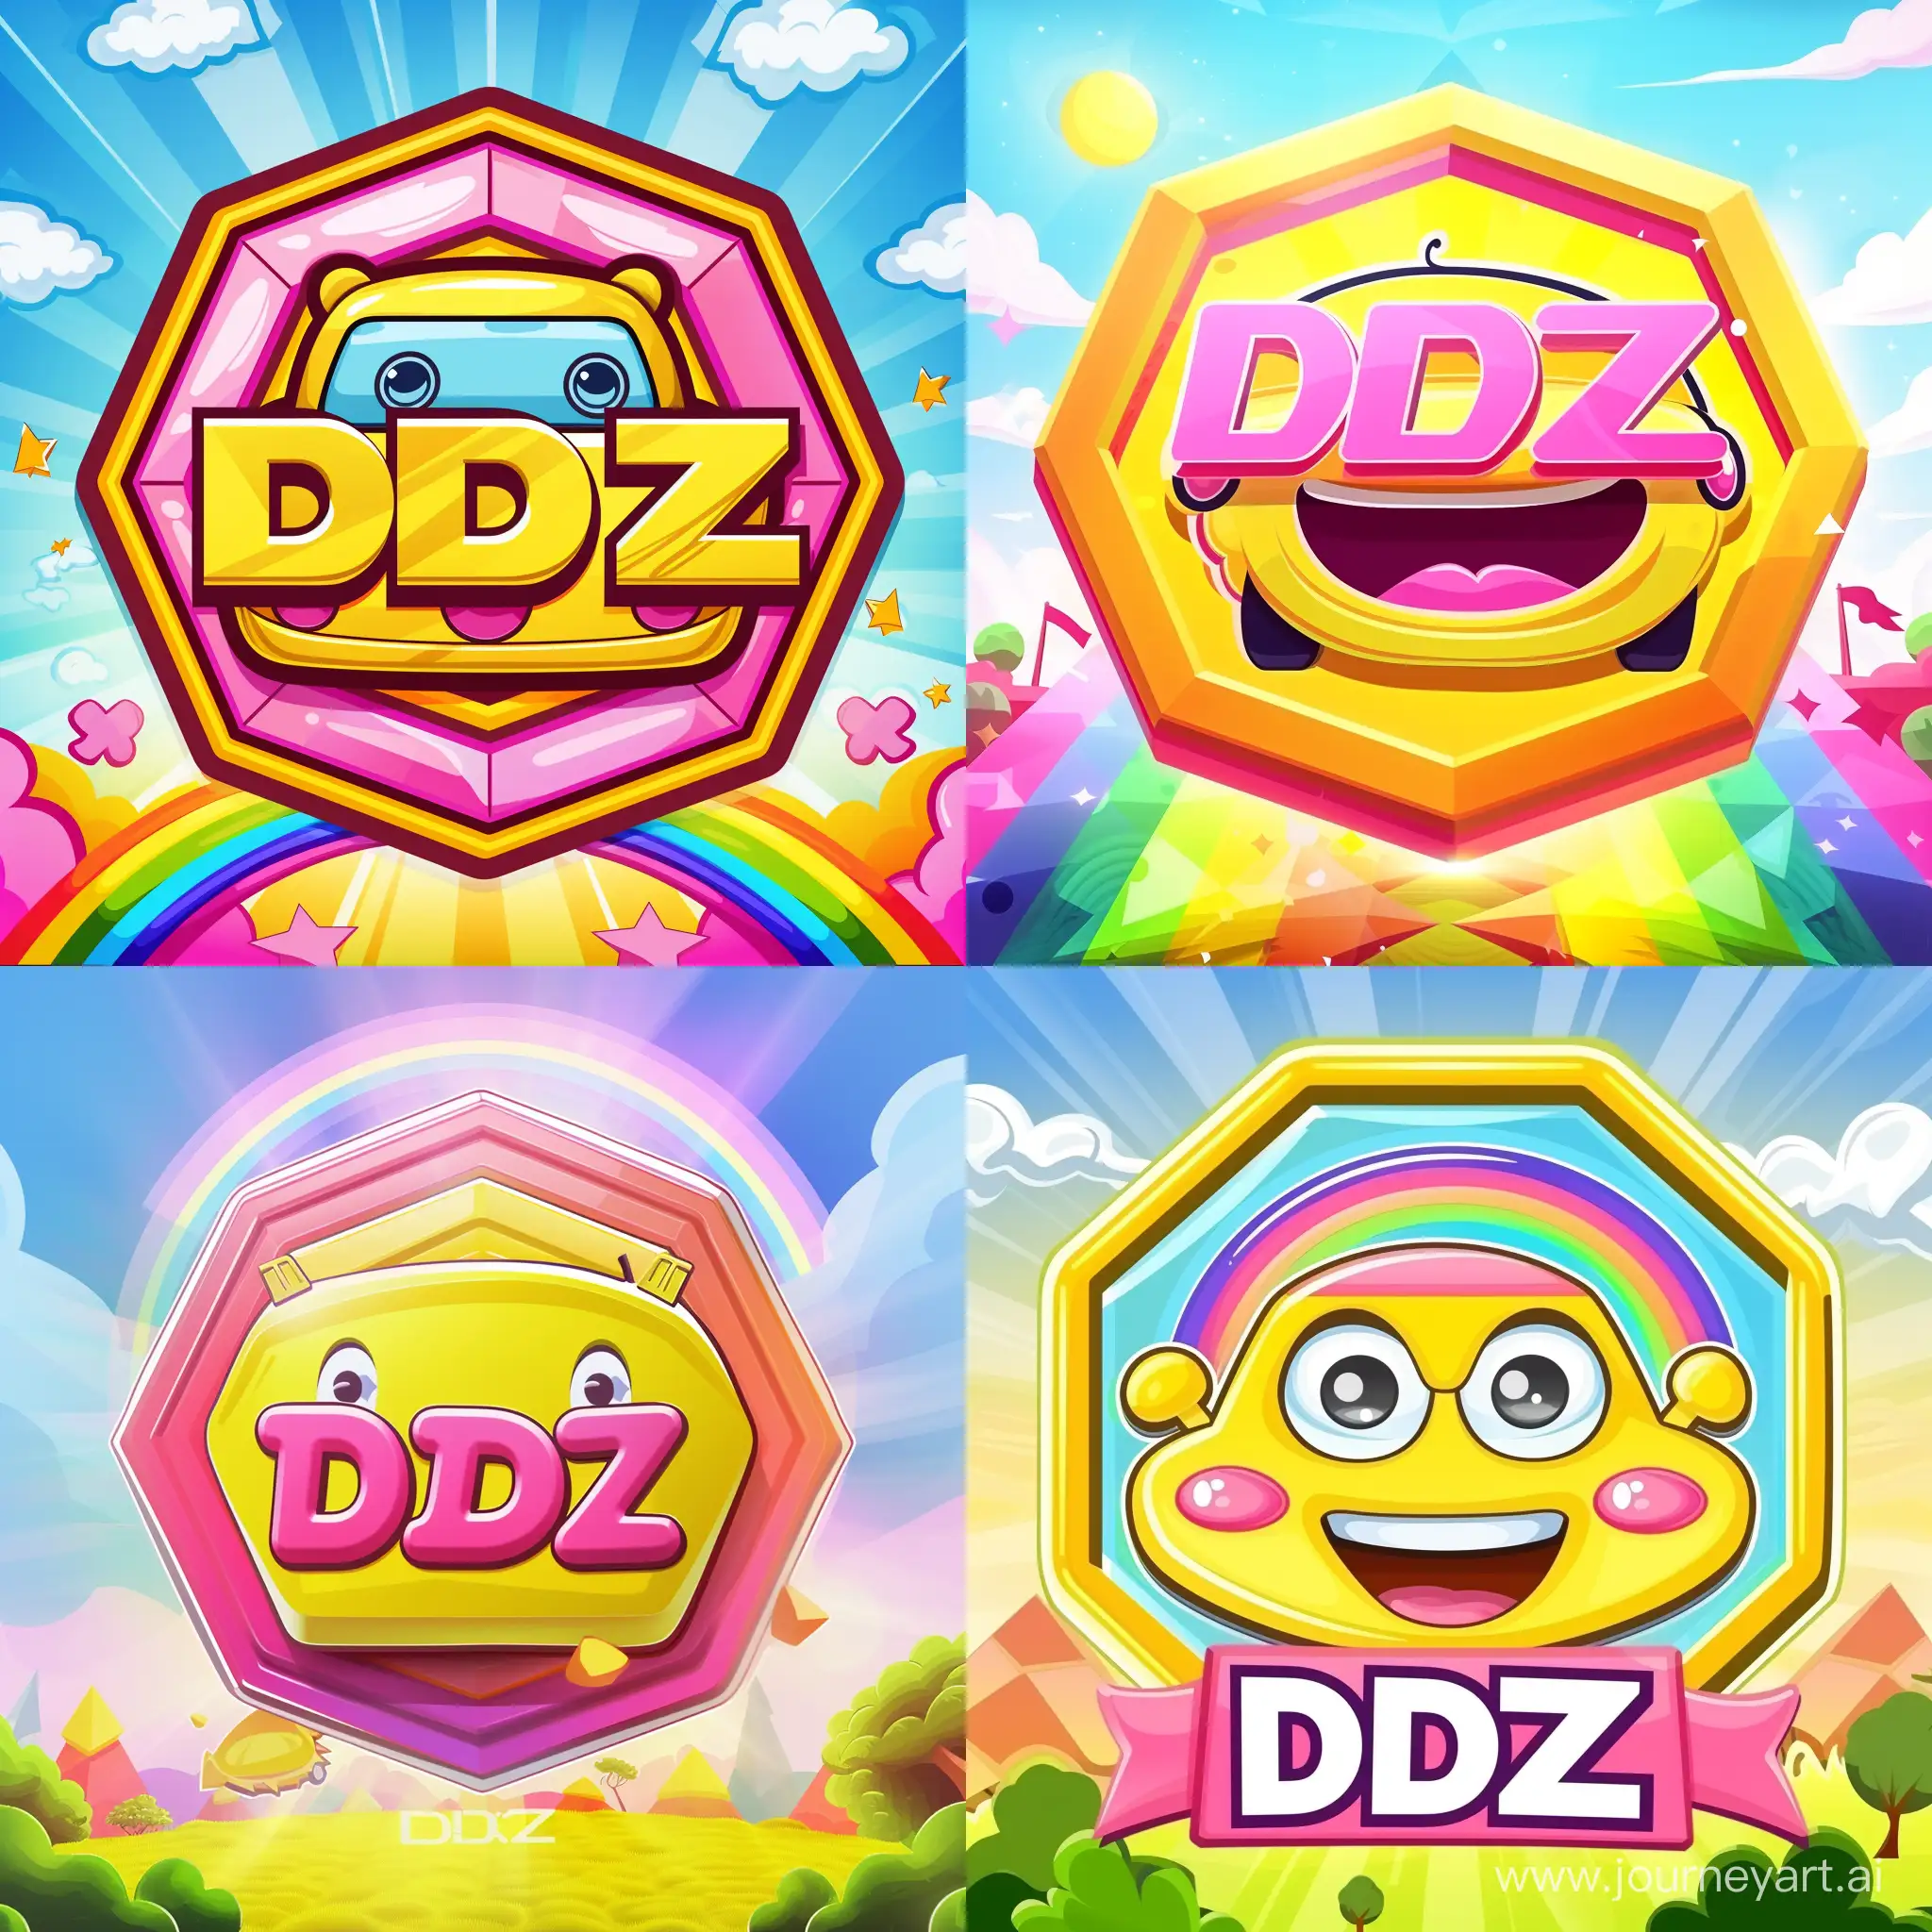 cute car race logo, octagon shape, main color yellow and pink, rainbow,  tag DDZ, funny and sunny background